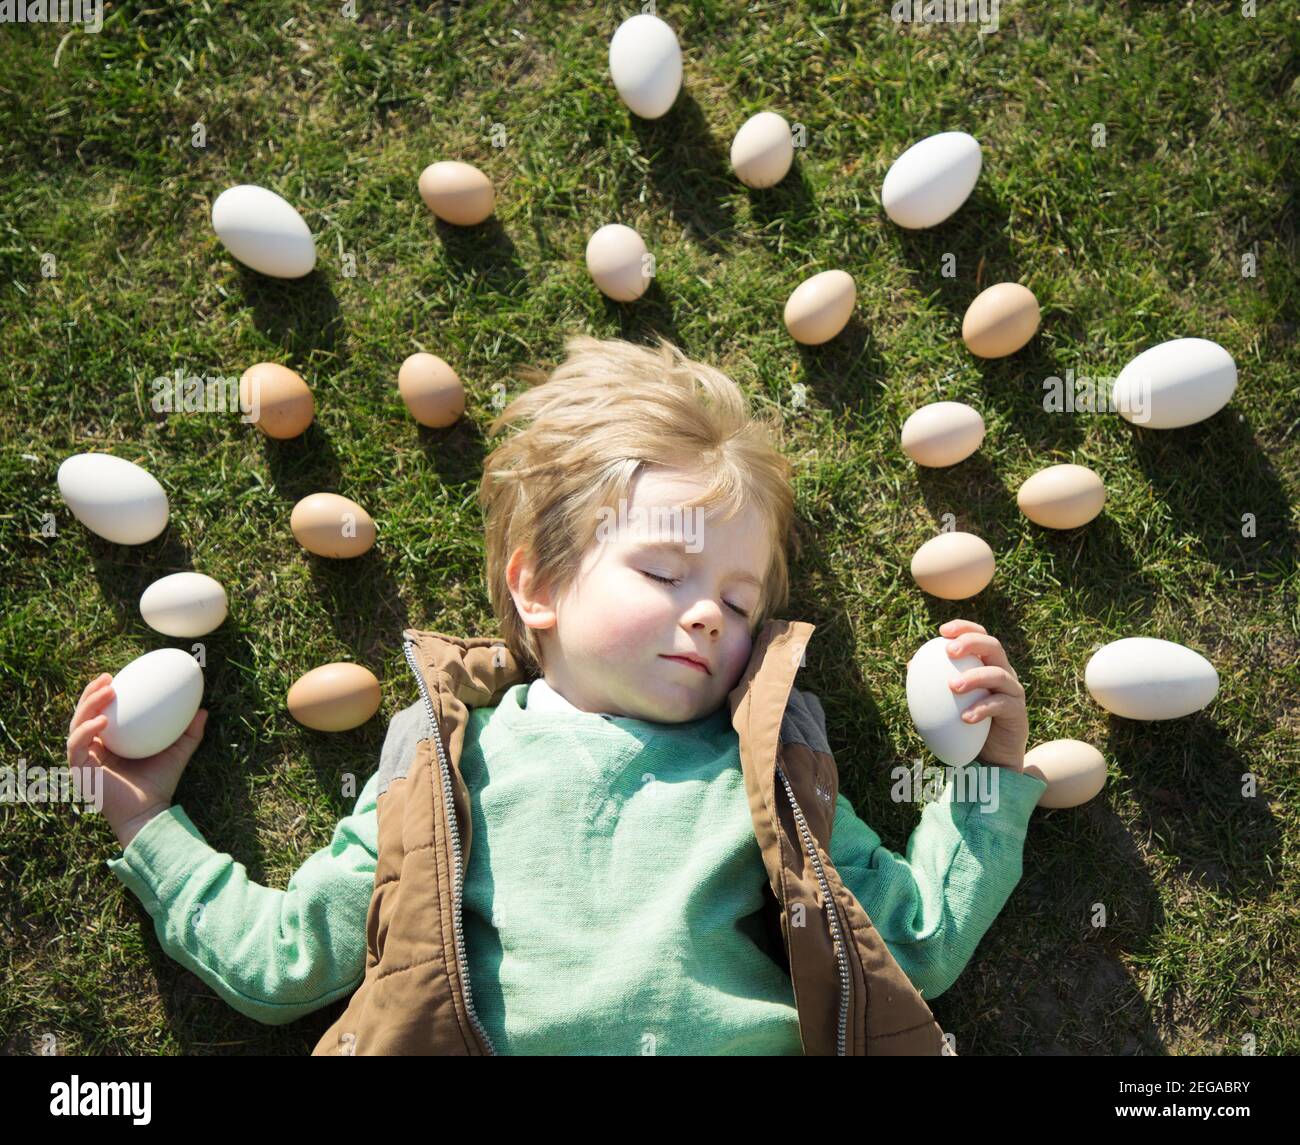 many white and beige chicken and goose eggs are laid out around the head of a 4-year-old blond boy sleeping on the grass. Cheerful preparation for Eas Stock Photo